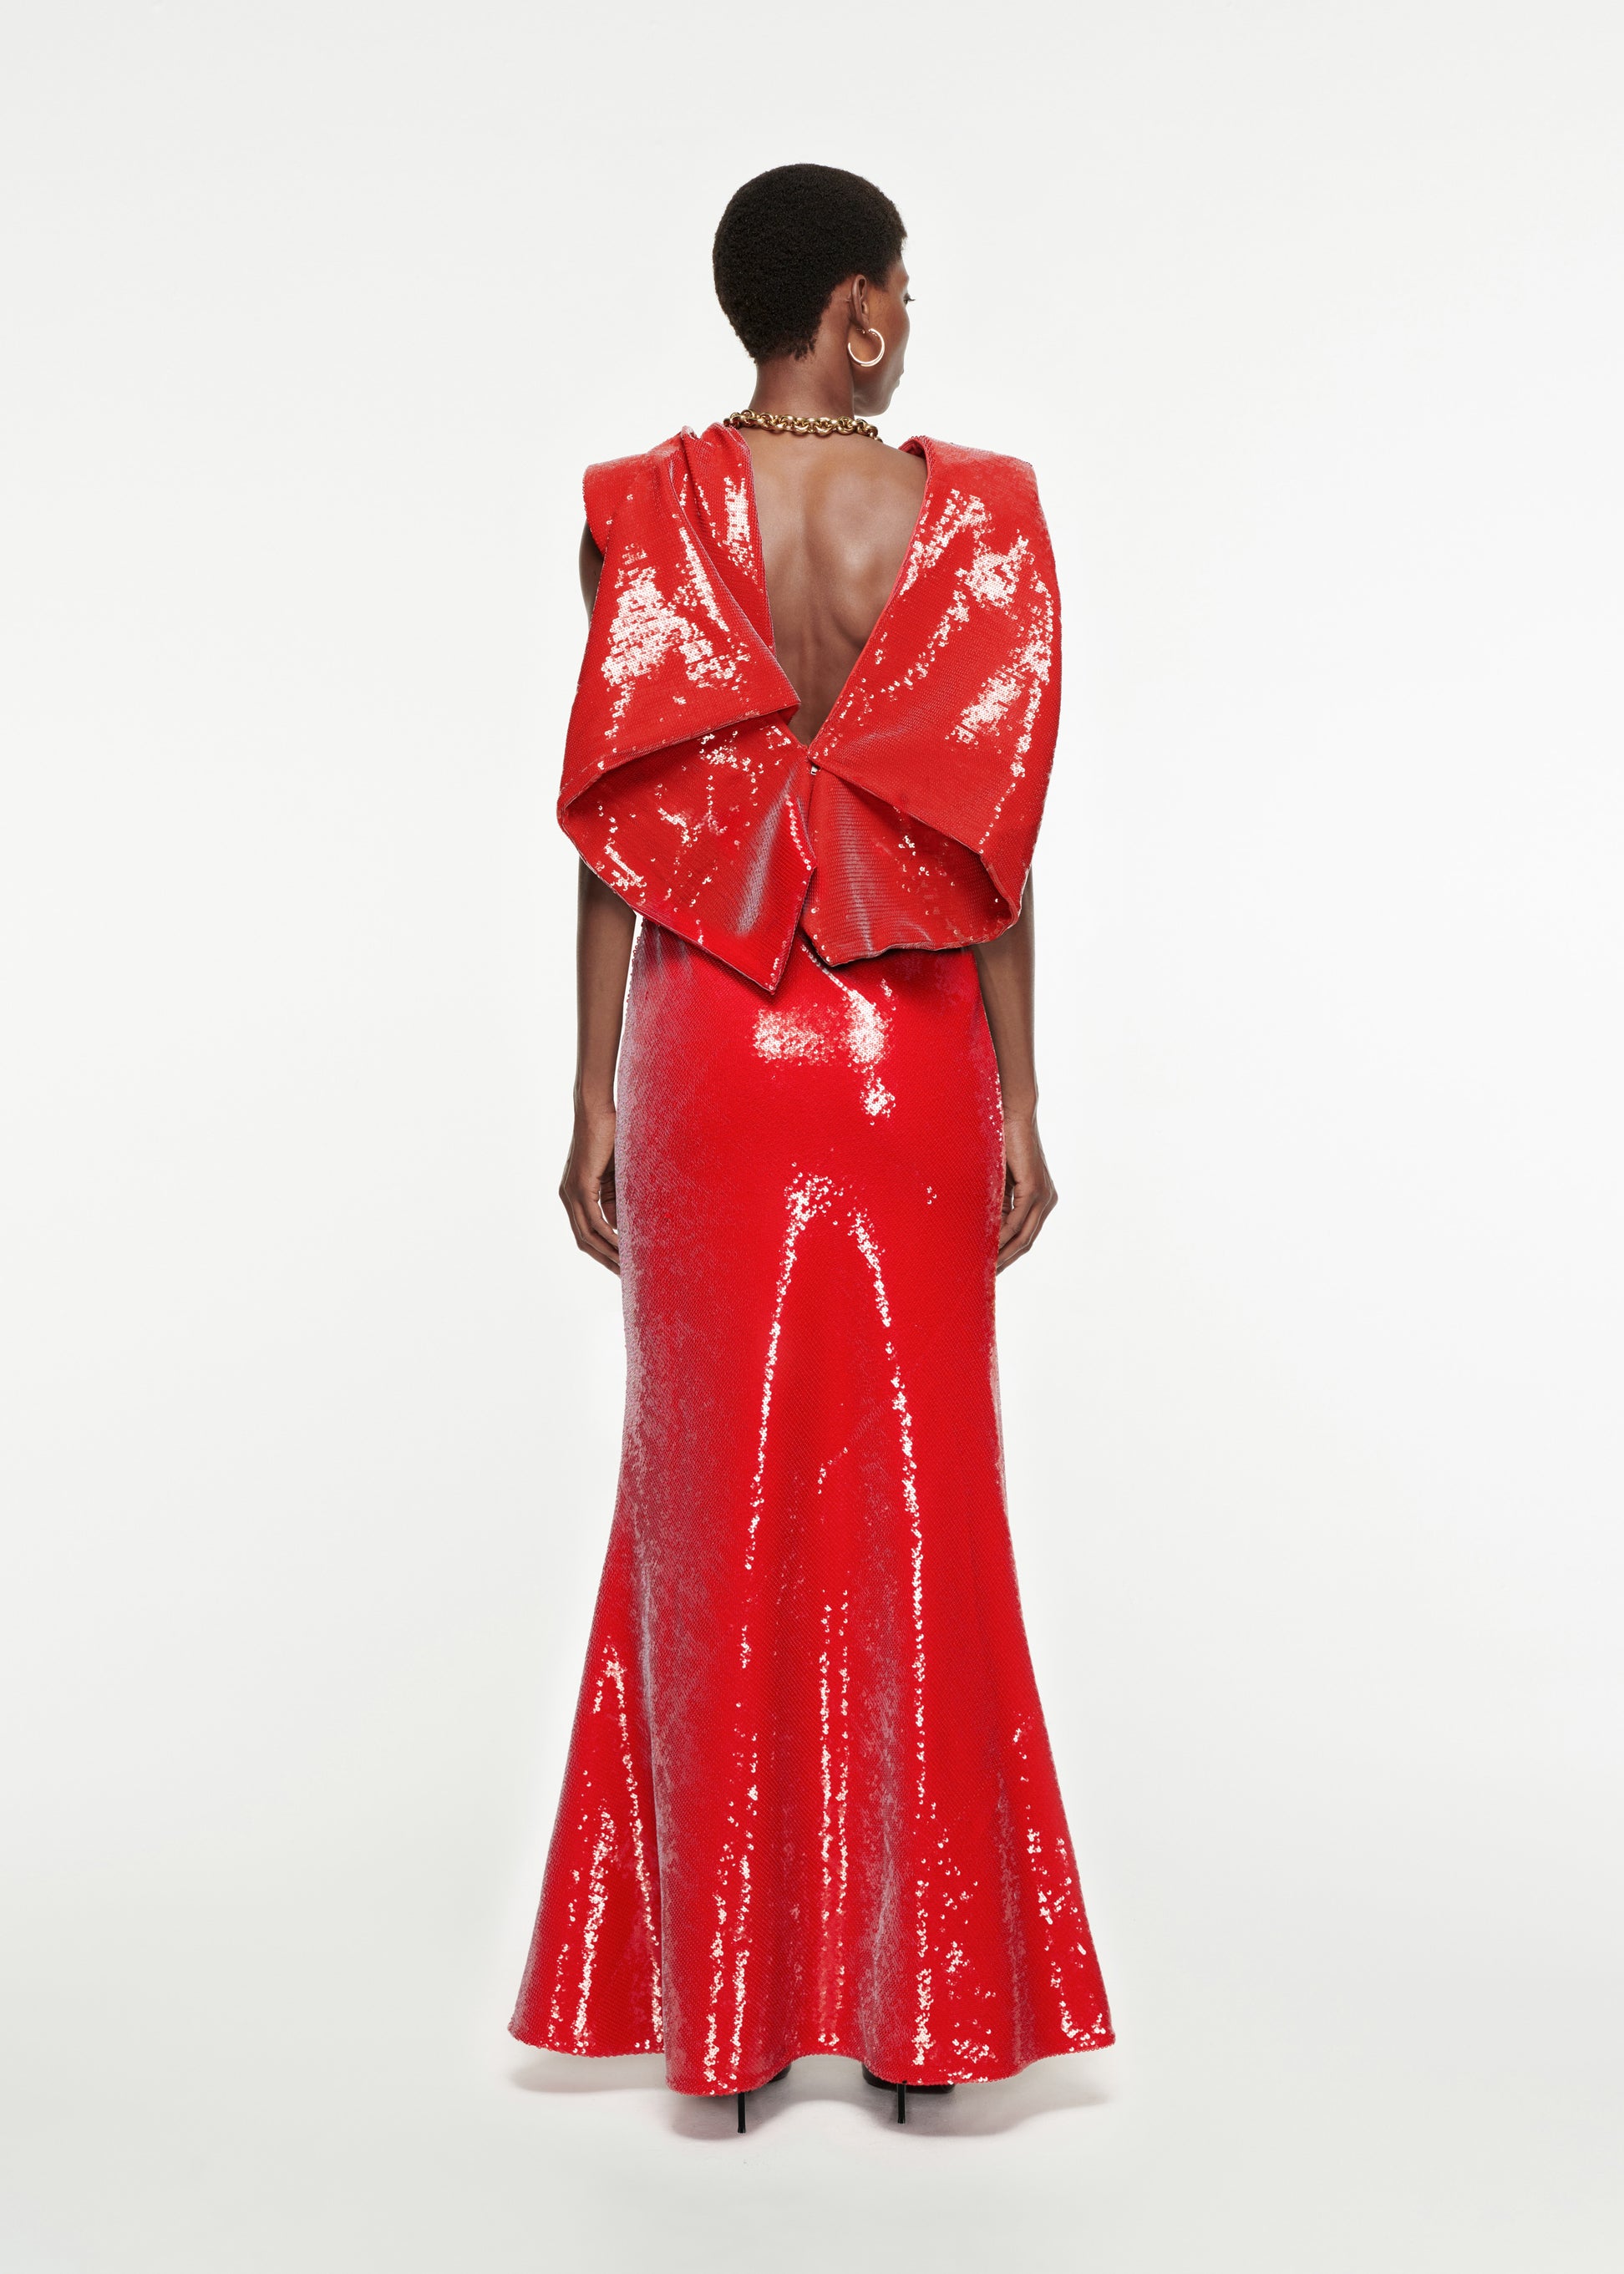 The back of a woman wearing the Draped Sequin Gown in Red